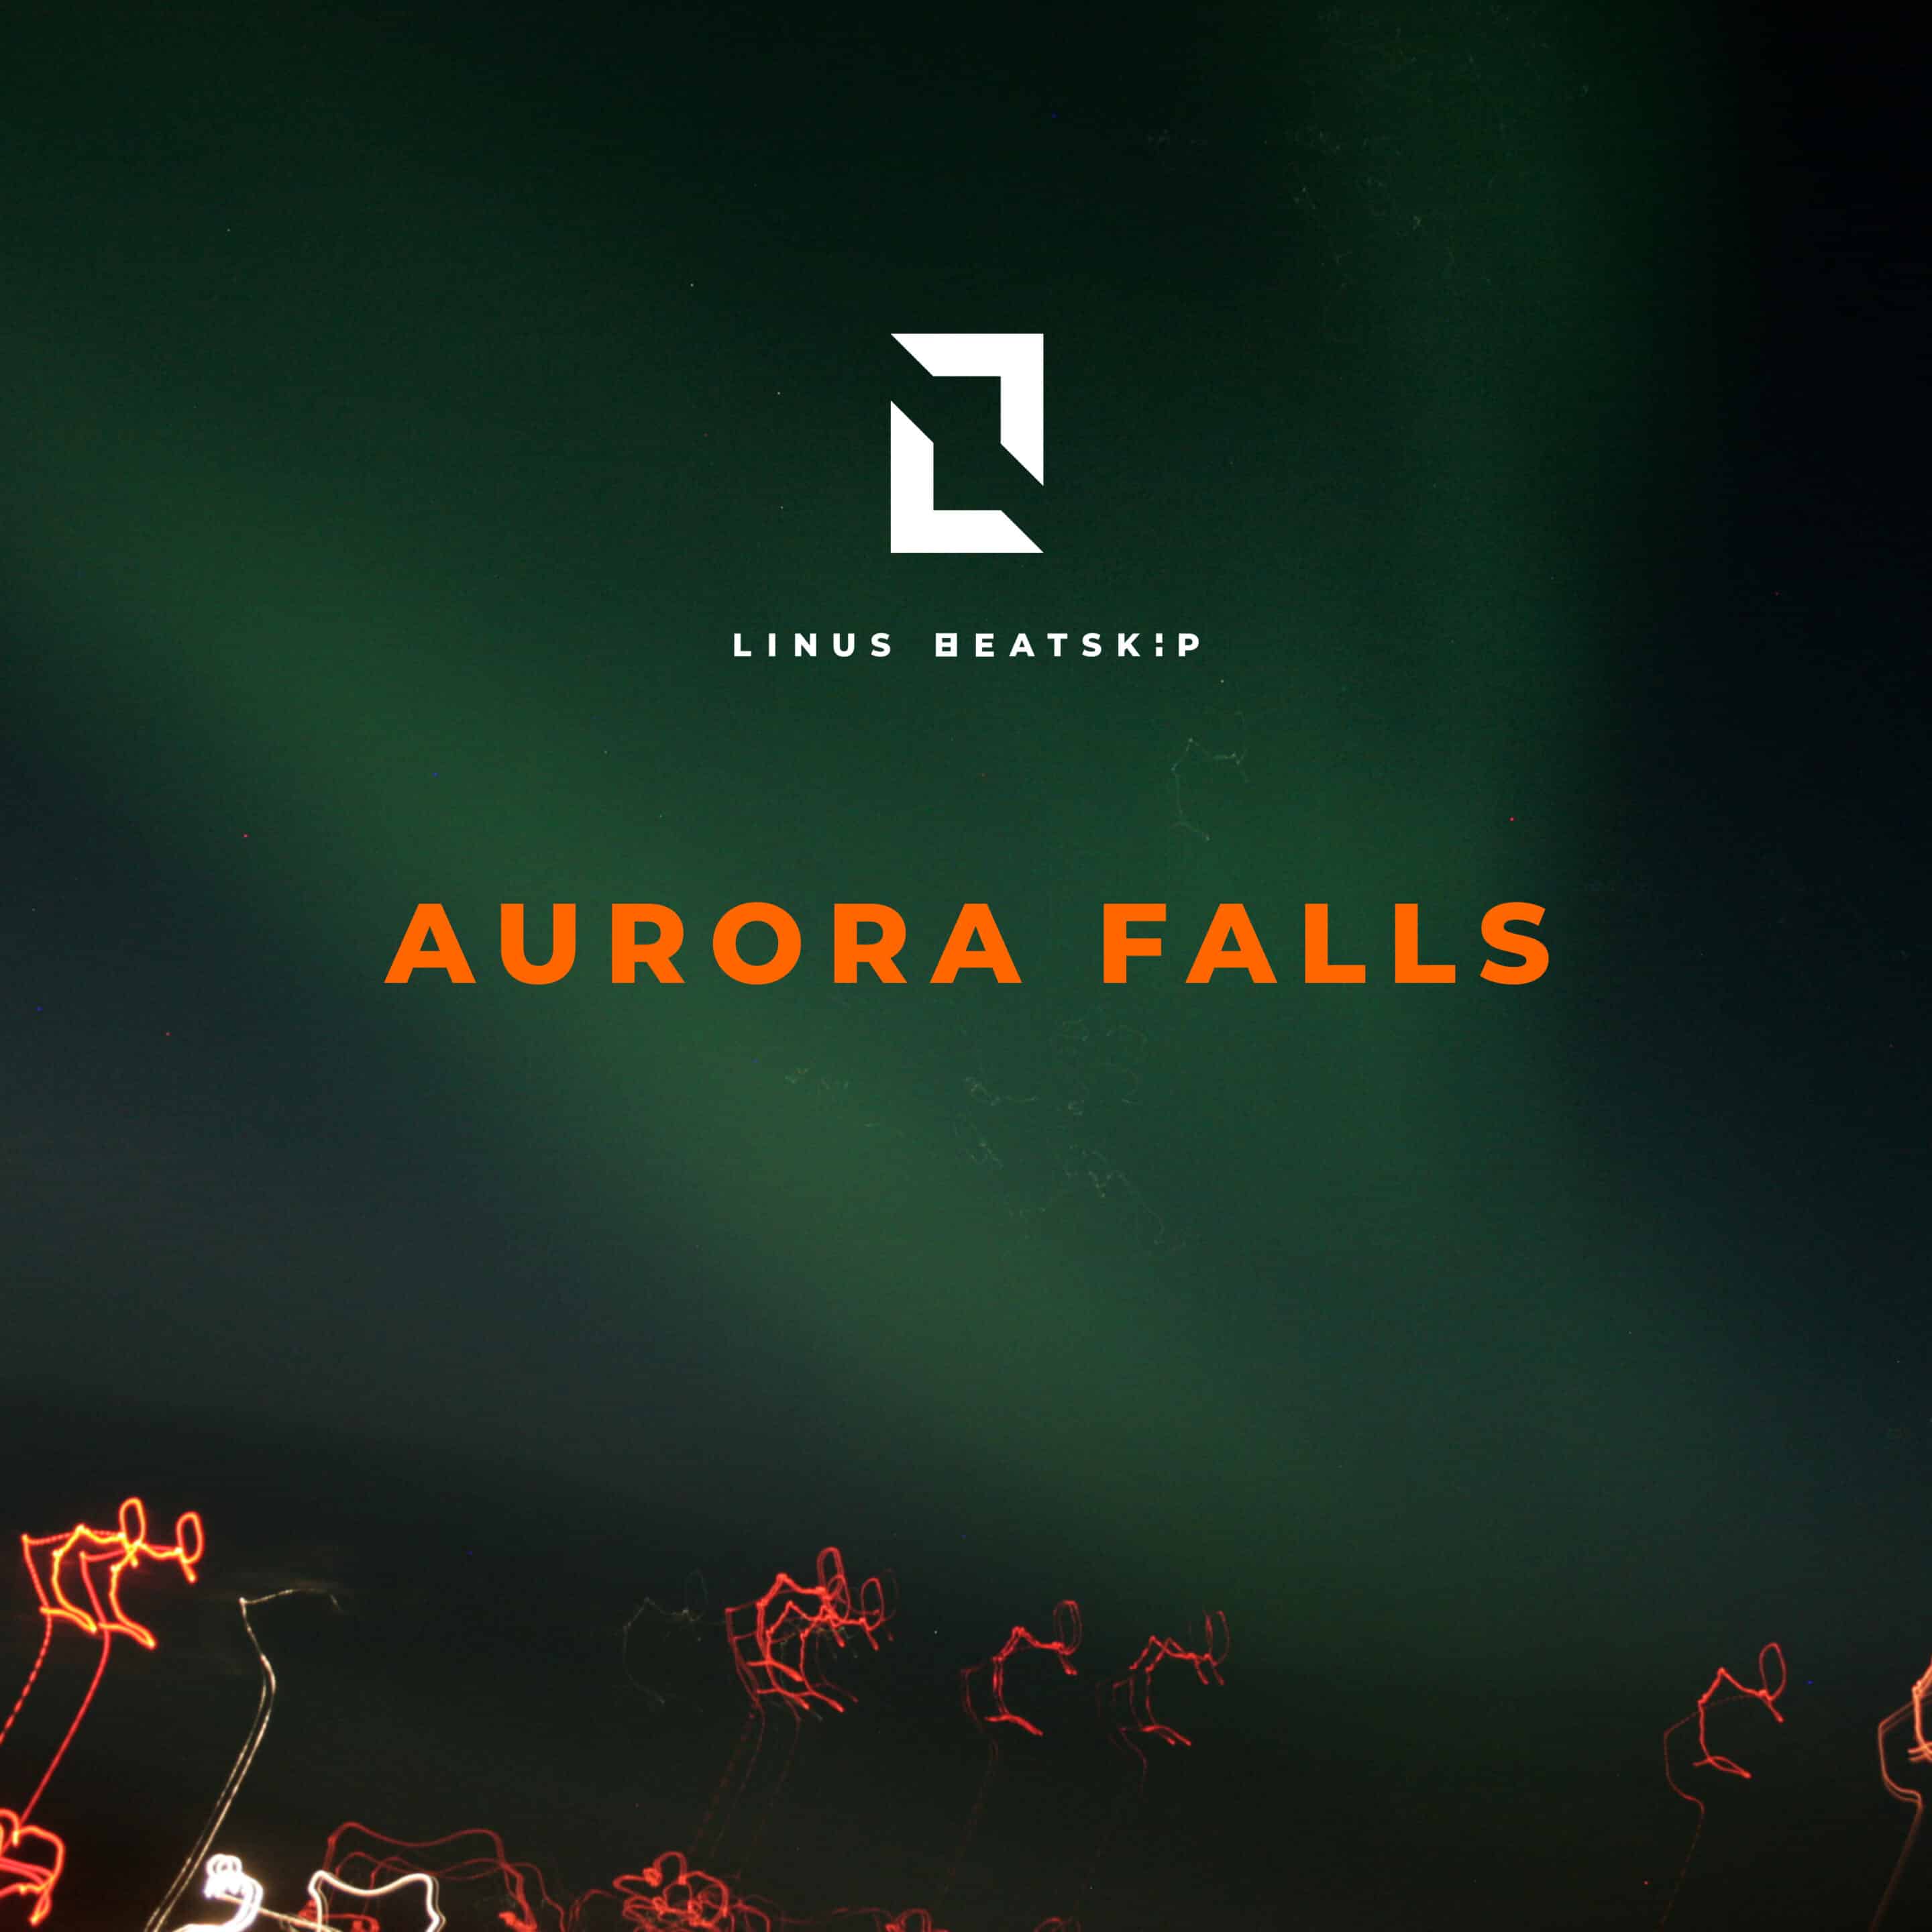 Ambient Chill out track - Aurora Falls from Linus Beatskip